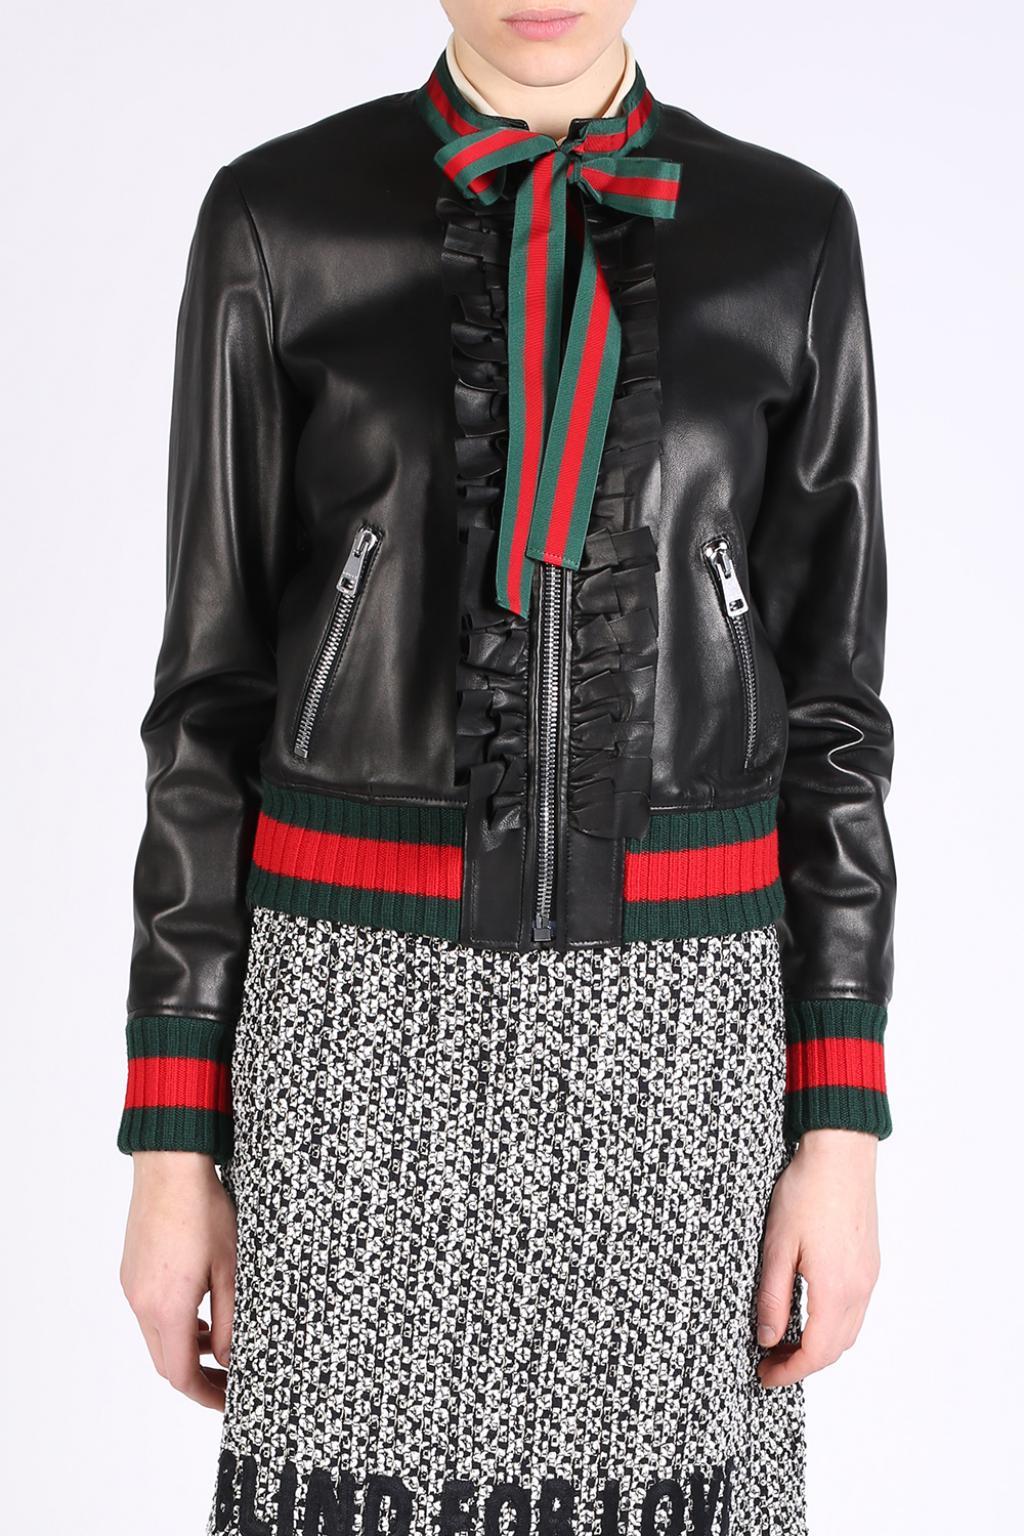 Gucci Ruffle Leather Bomber Jacket in Black | Lyst